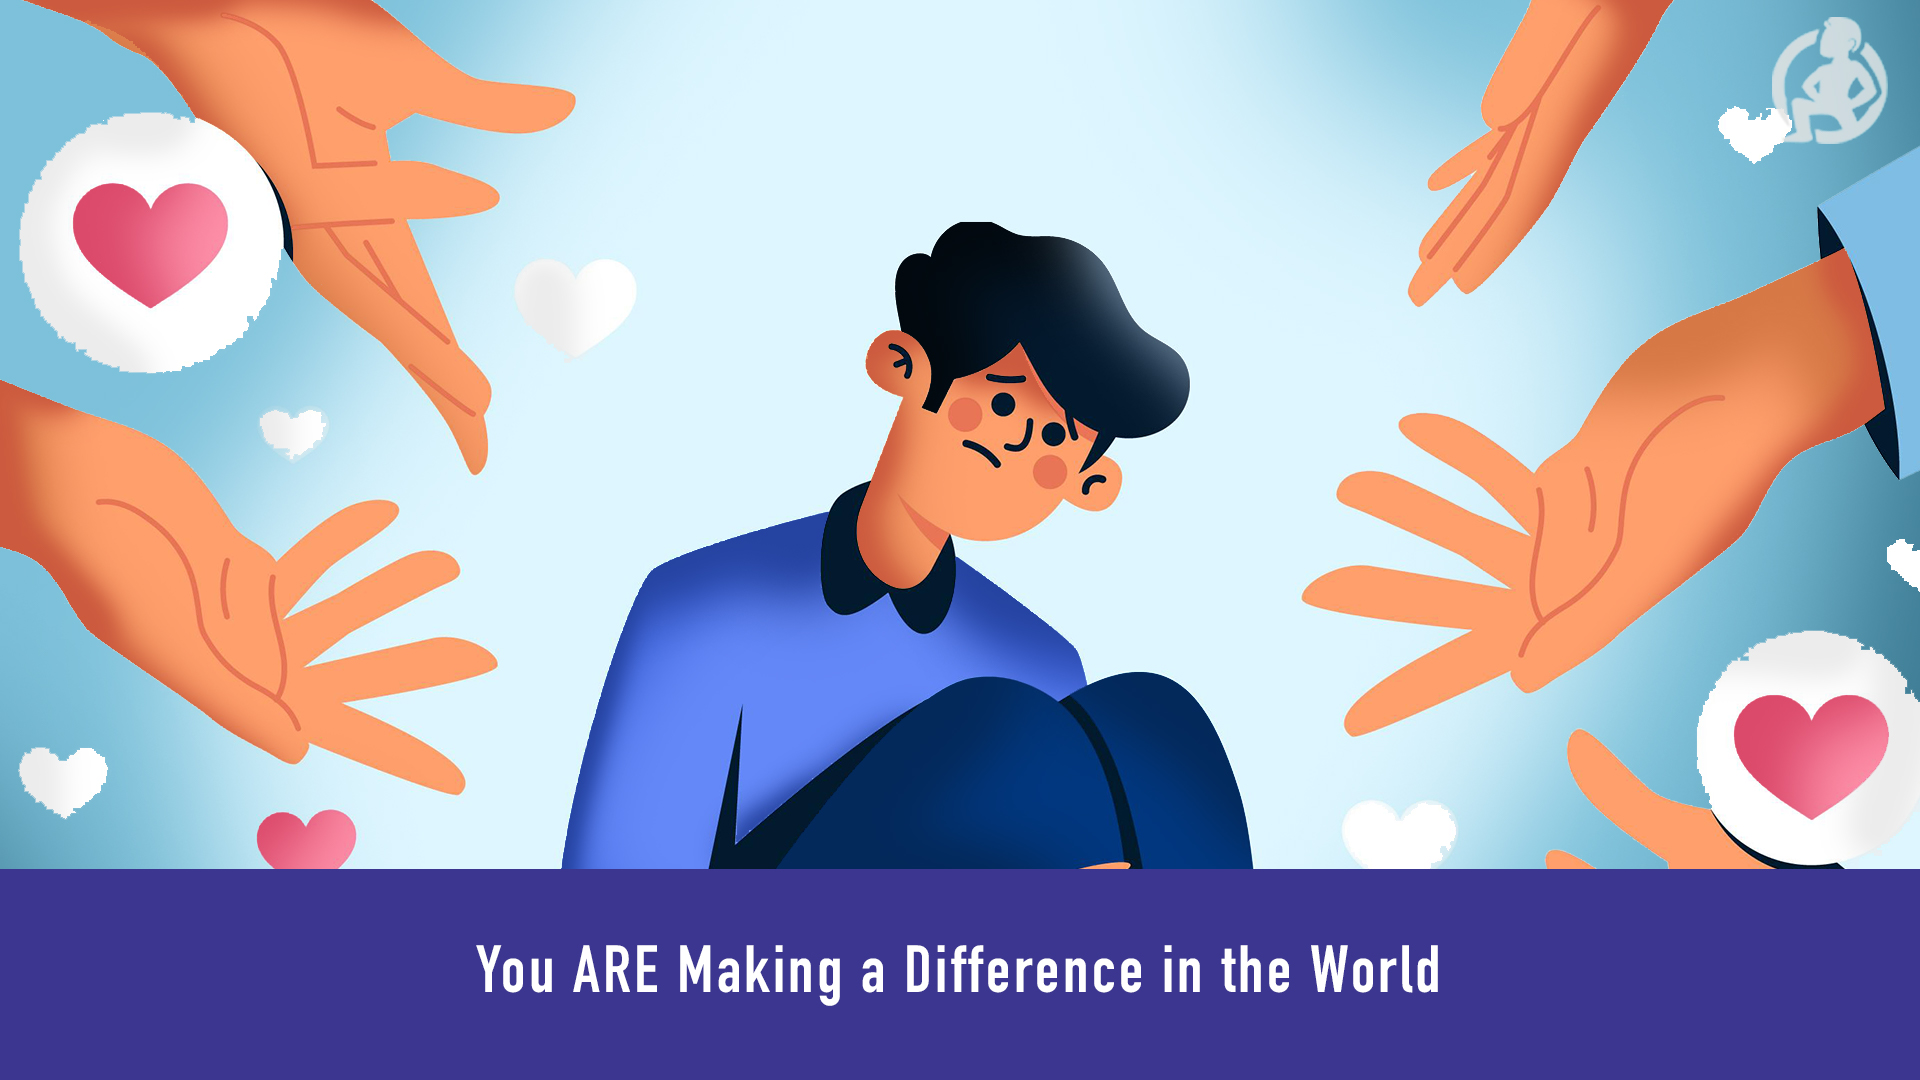 You ARE Making a Difference in the World